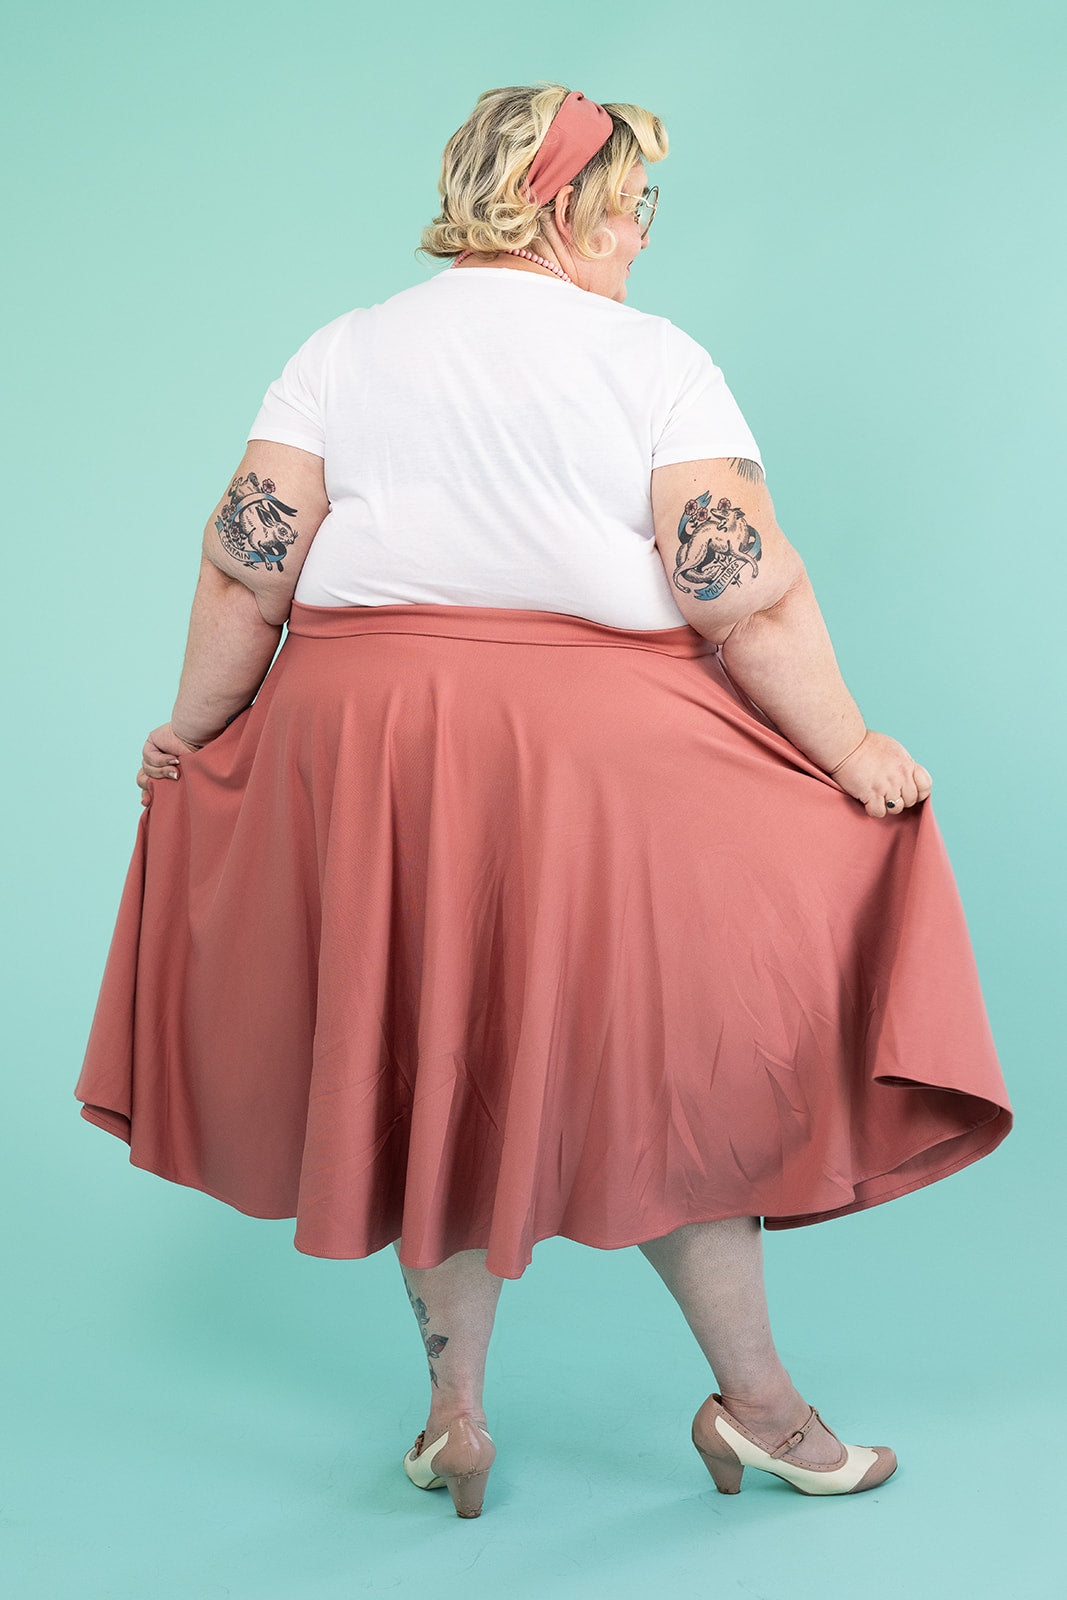 A plus-size blonde woman is facing away from the camera and showing off her skirt. She has several tattoos on her arms; she is wearing a white tshirt and a pink skirt